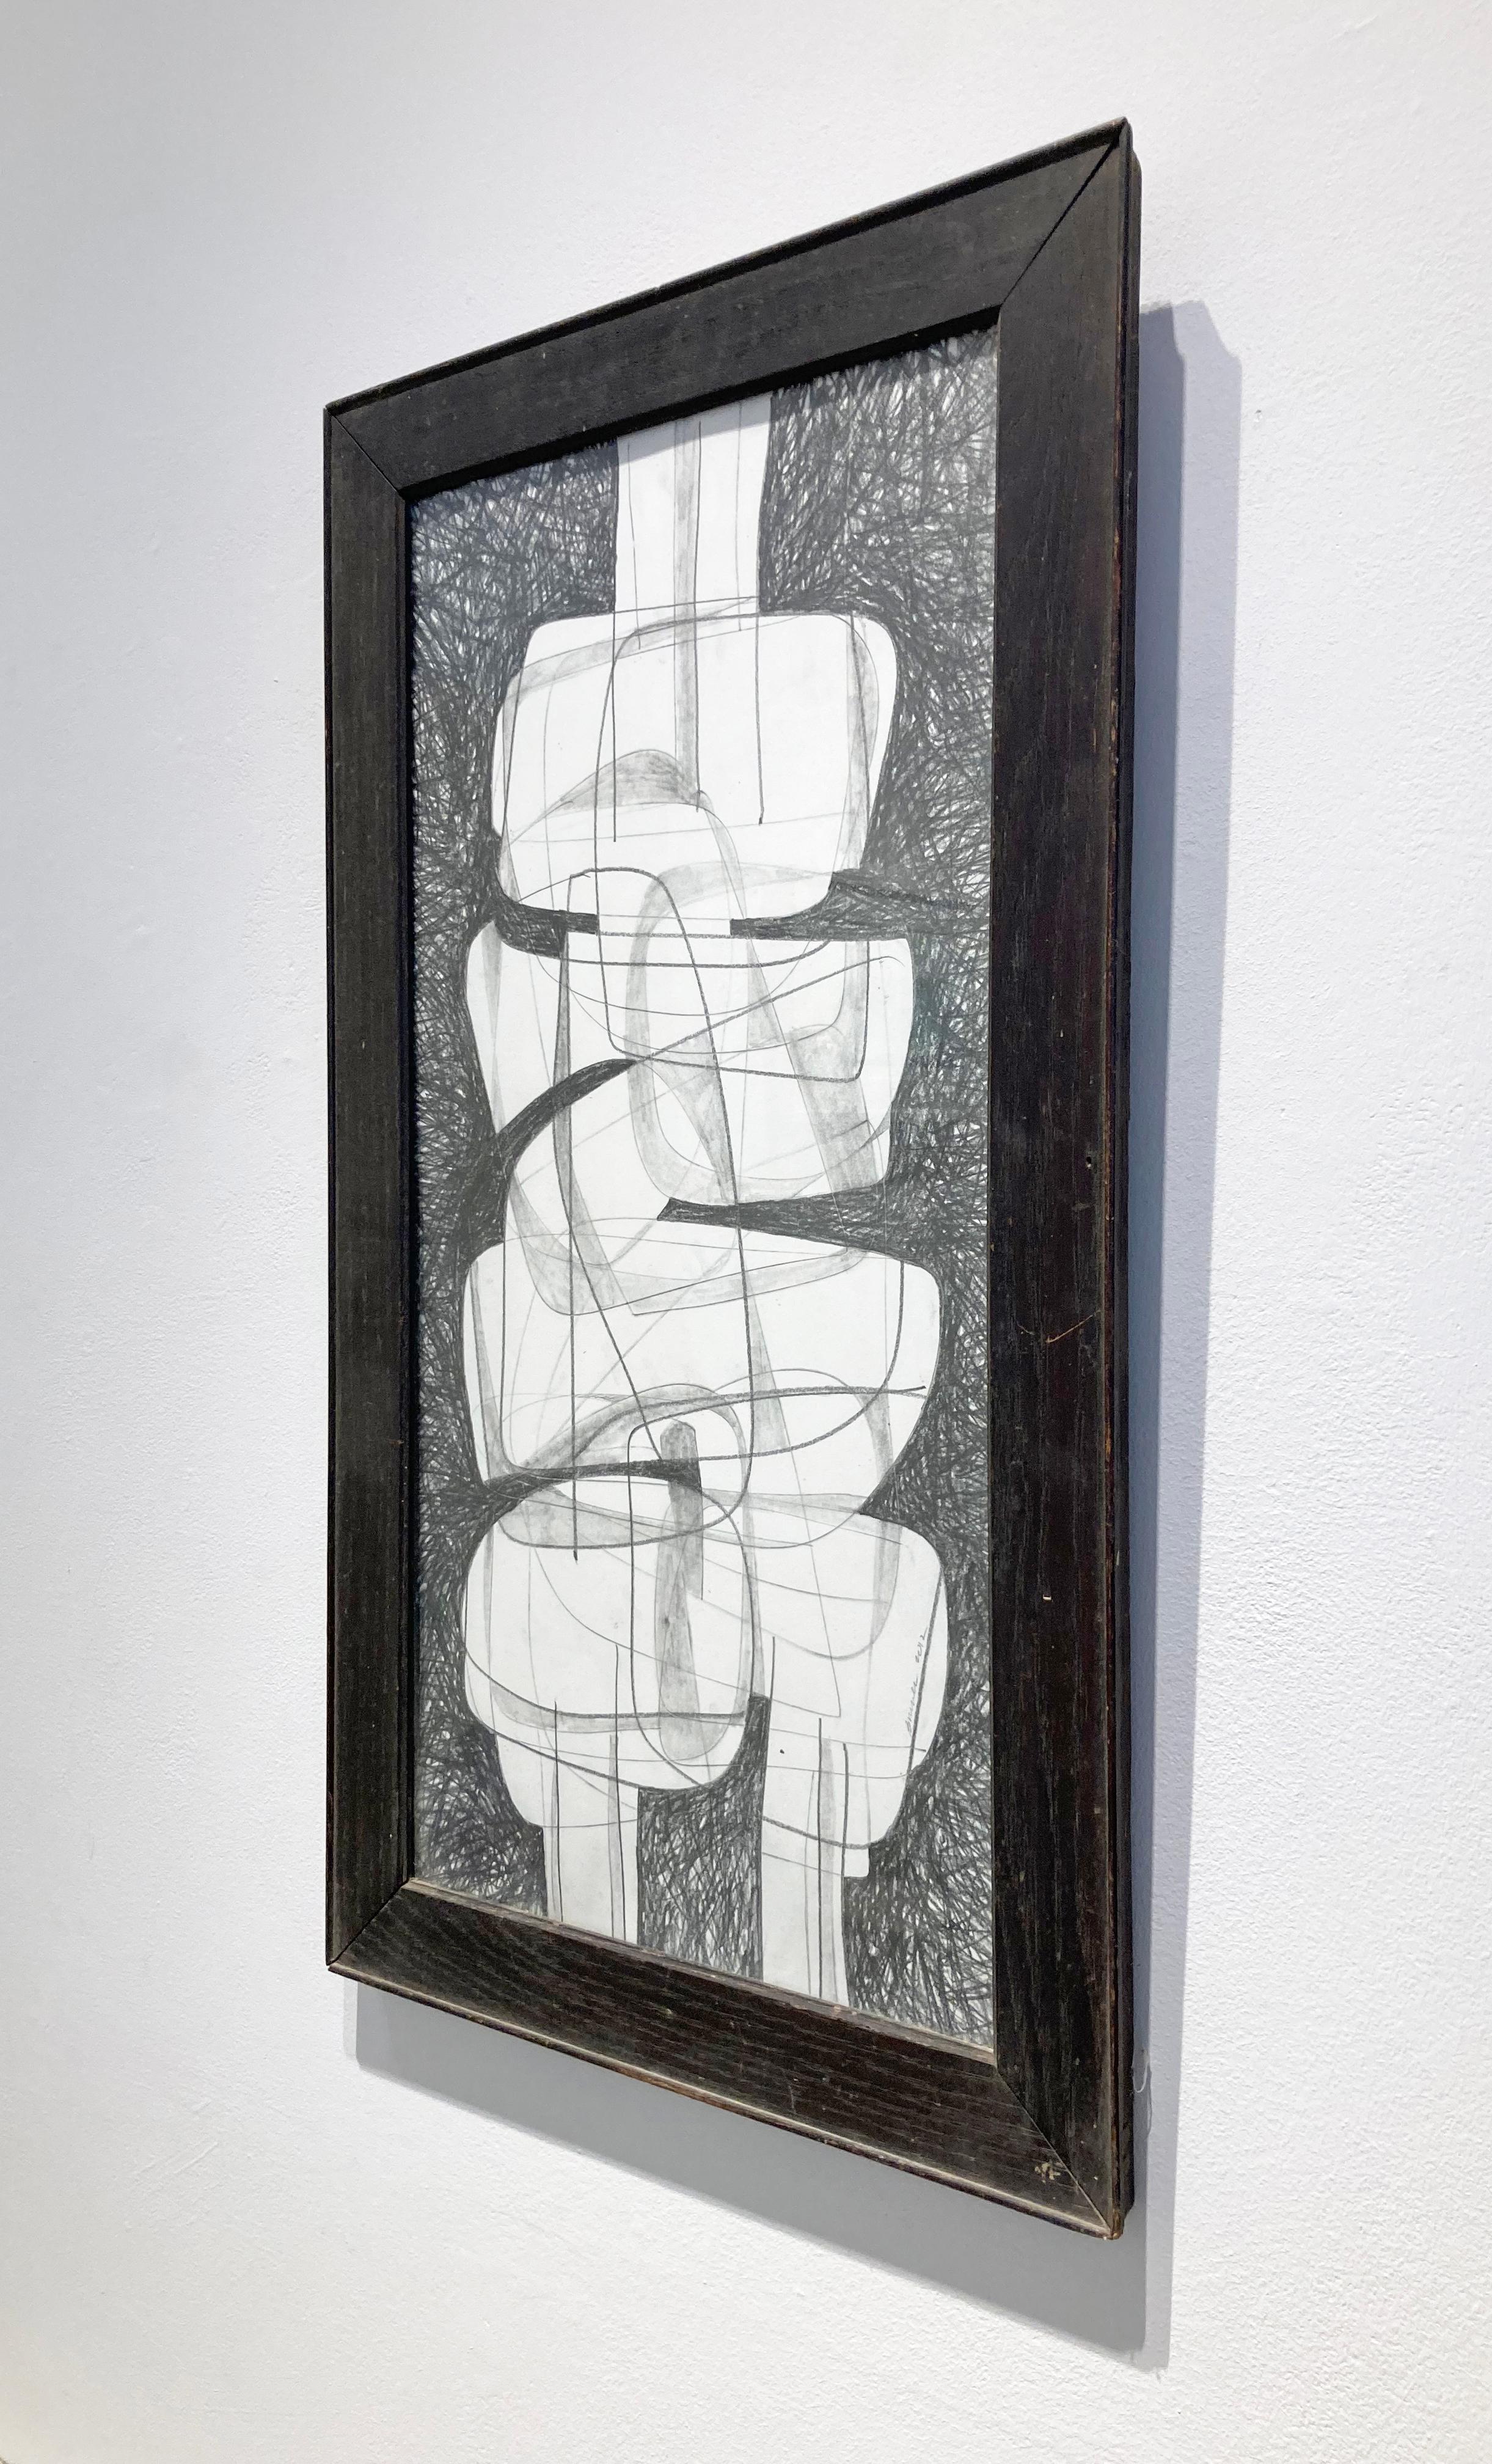 Figurative abstract cubist style drawing in an antique wood frame, inspired by artwork by Graham Sutherland 
“Sutherland Project VII” by Hudson Valley artist, David Dew Bruner, made in 2015
23.5 x 11.5 inch graphite on paper drawing in a 27.5 x 15.5